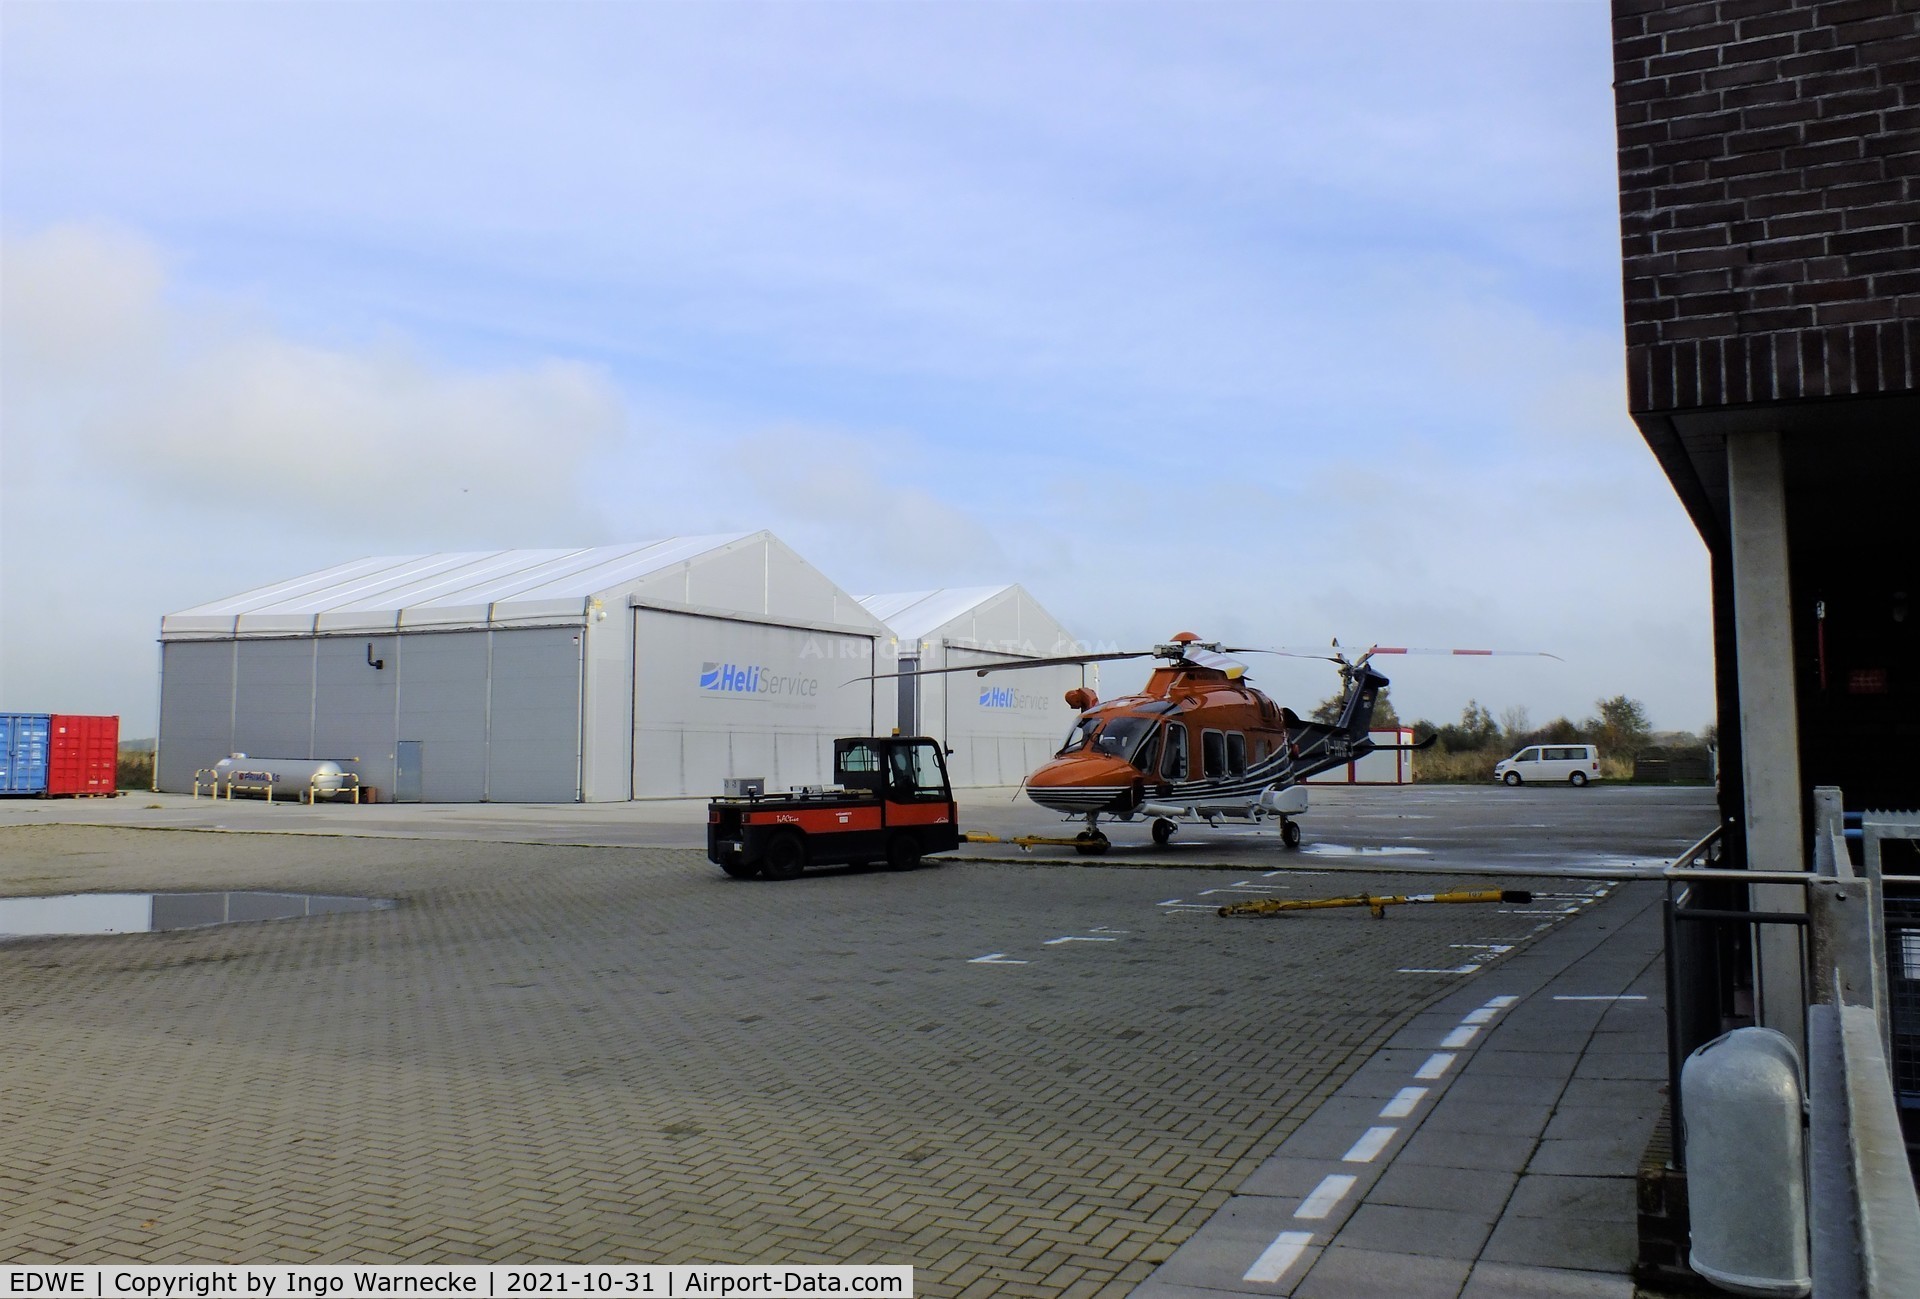 EDWE Airport - apron and hangars east of the tower at Emden airfield